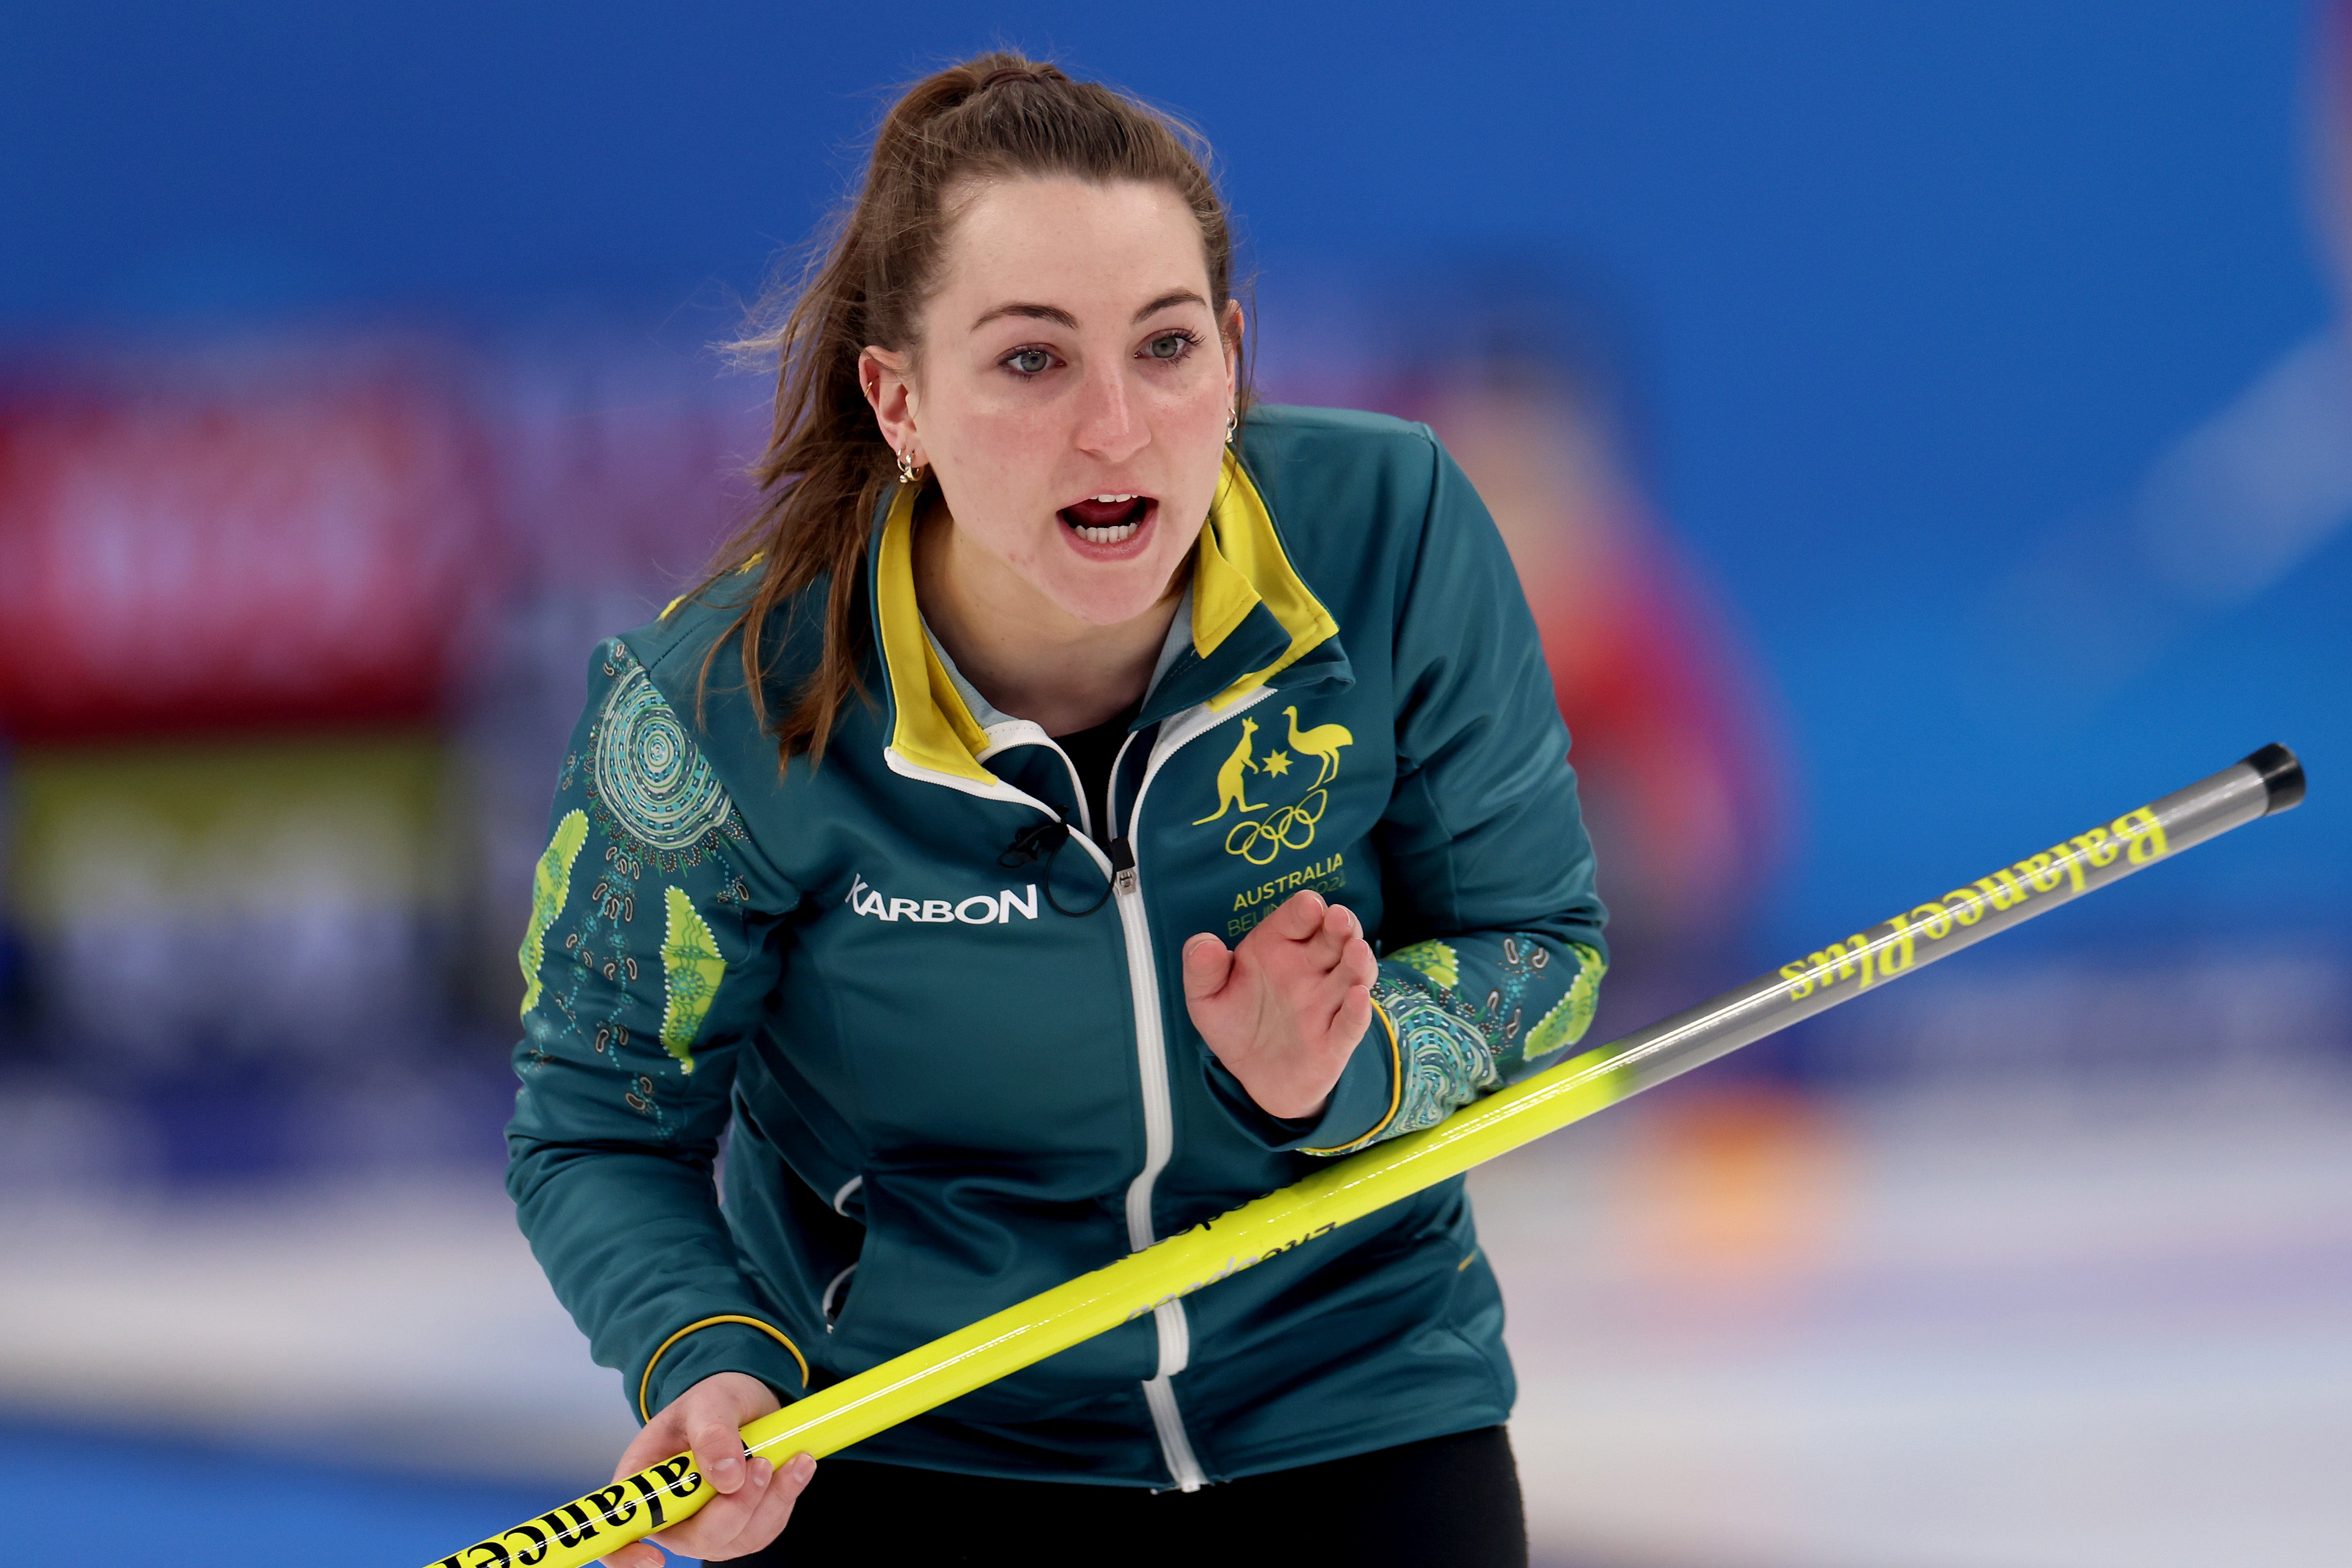 Tahli Gill competed in the mixed curling after returning a positive Covid test